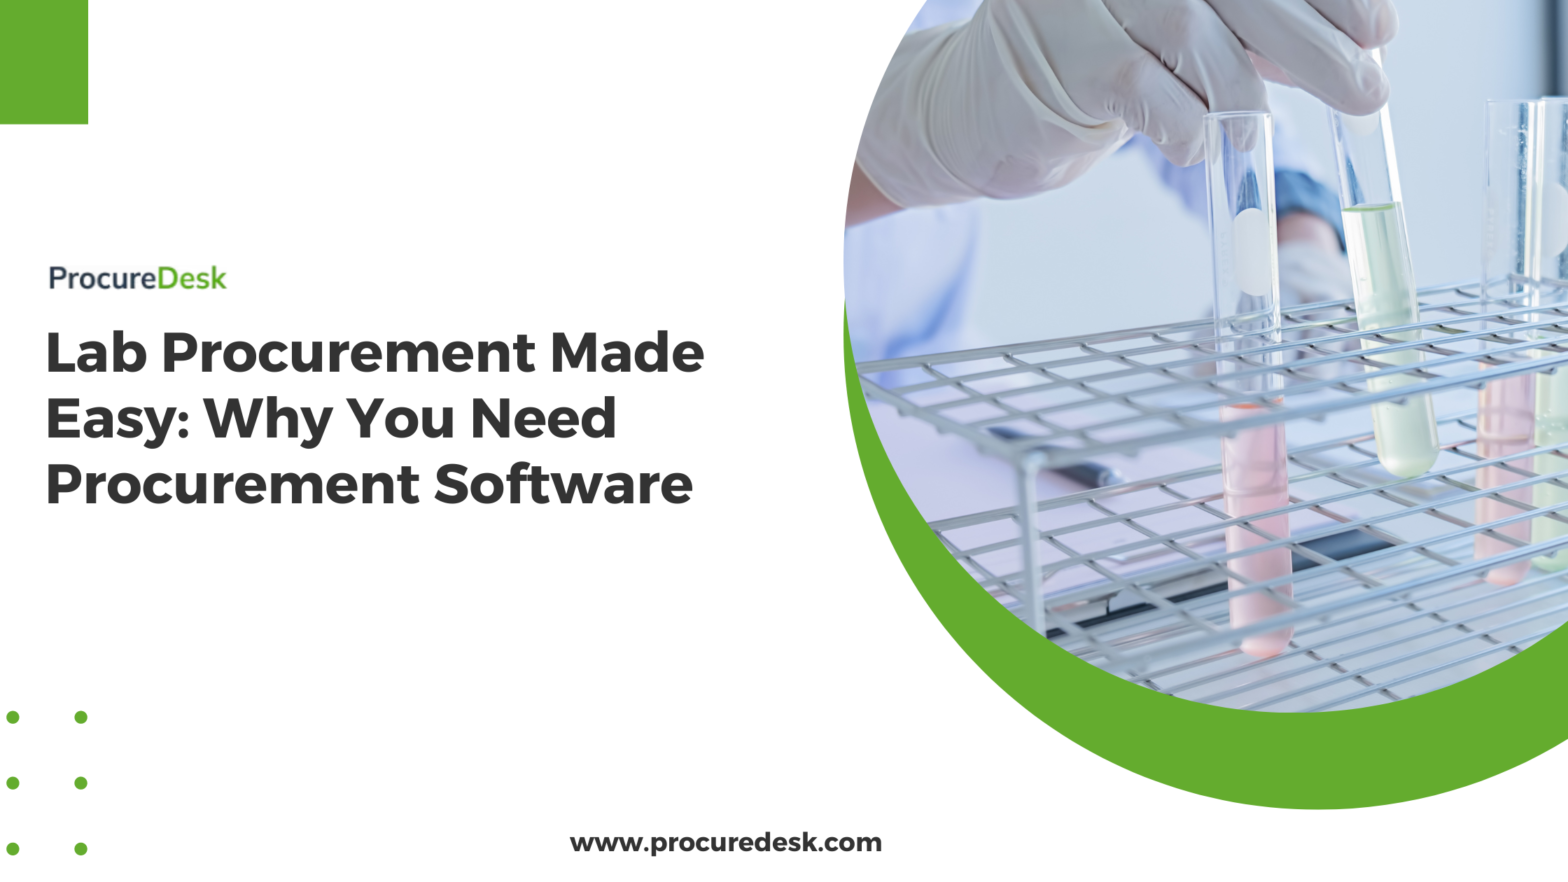 Lab Procurement Made Easy: Why You Need Procurement Software